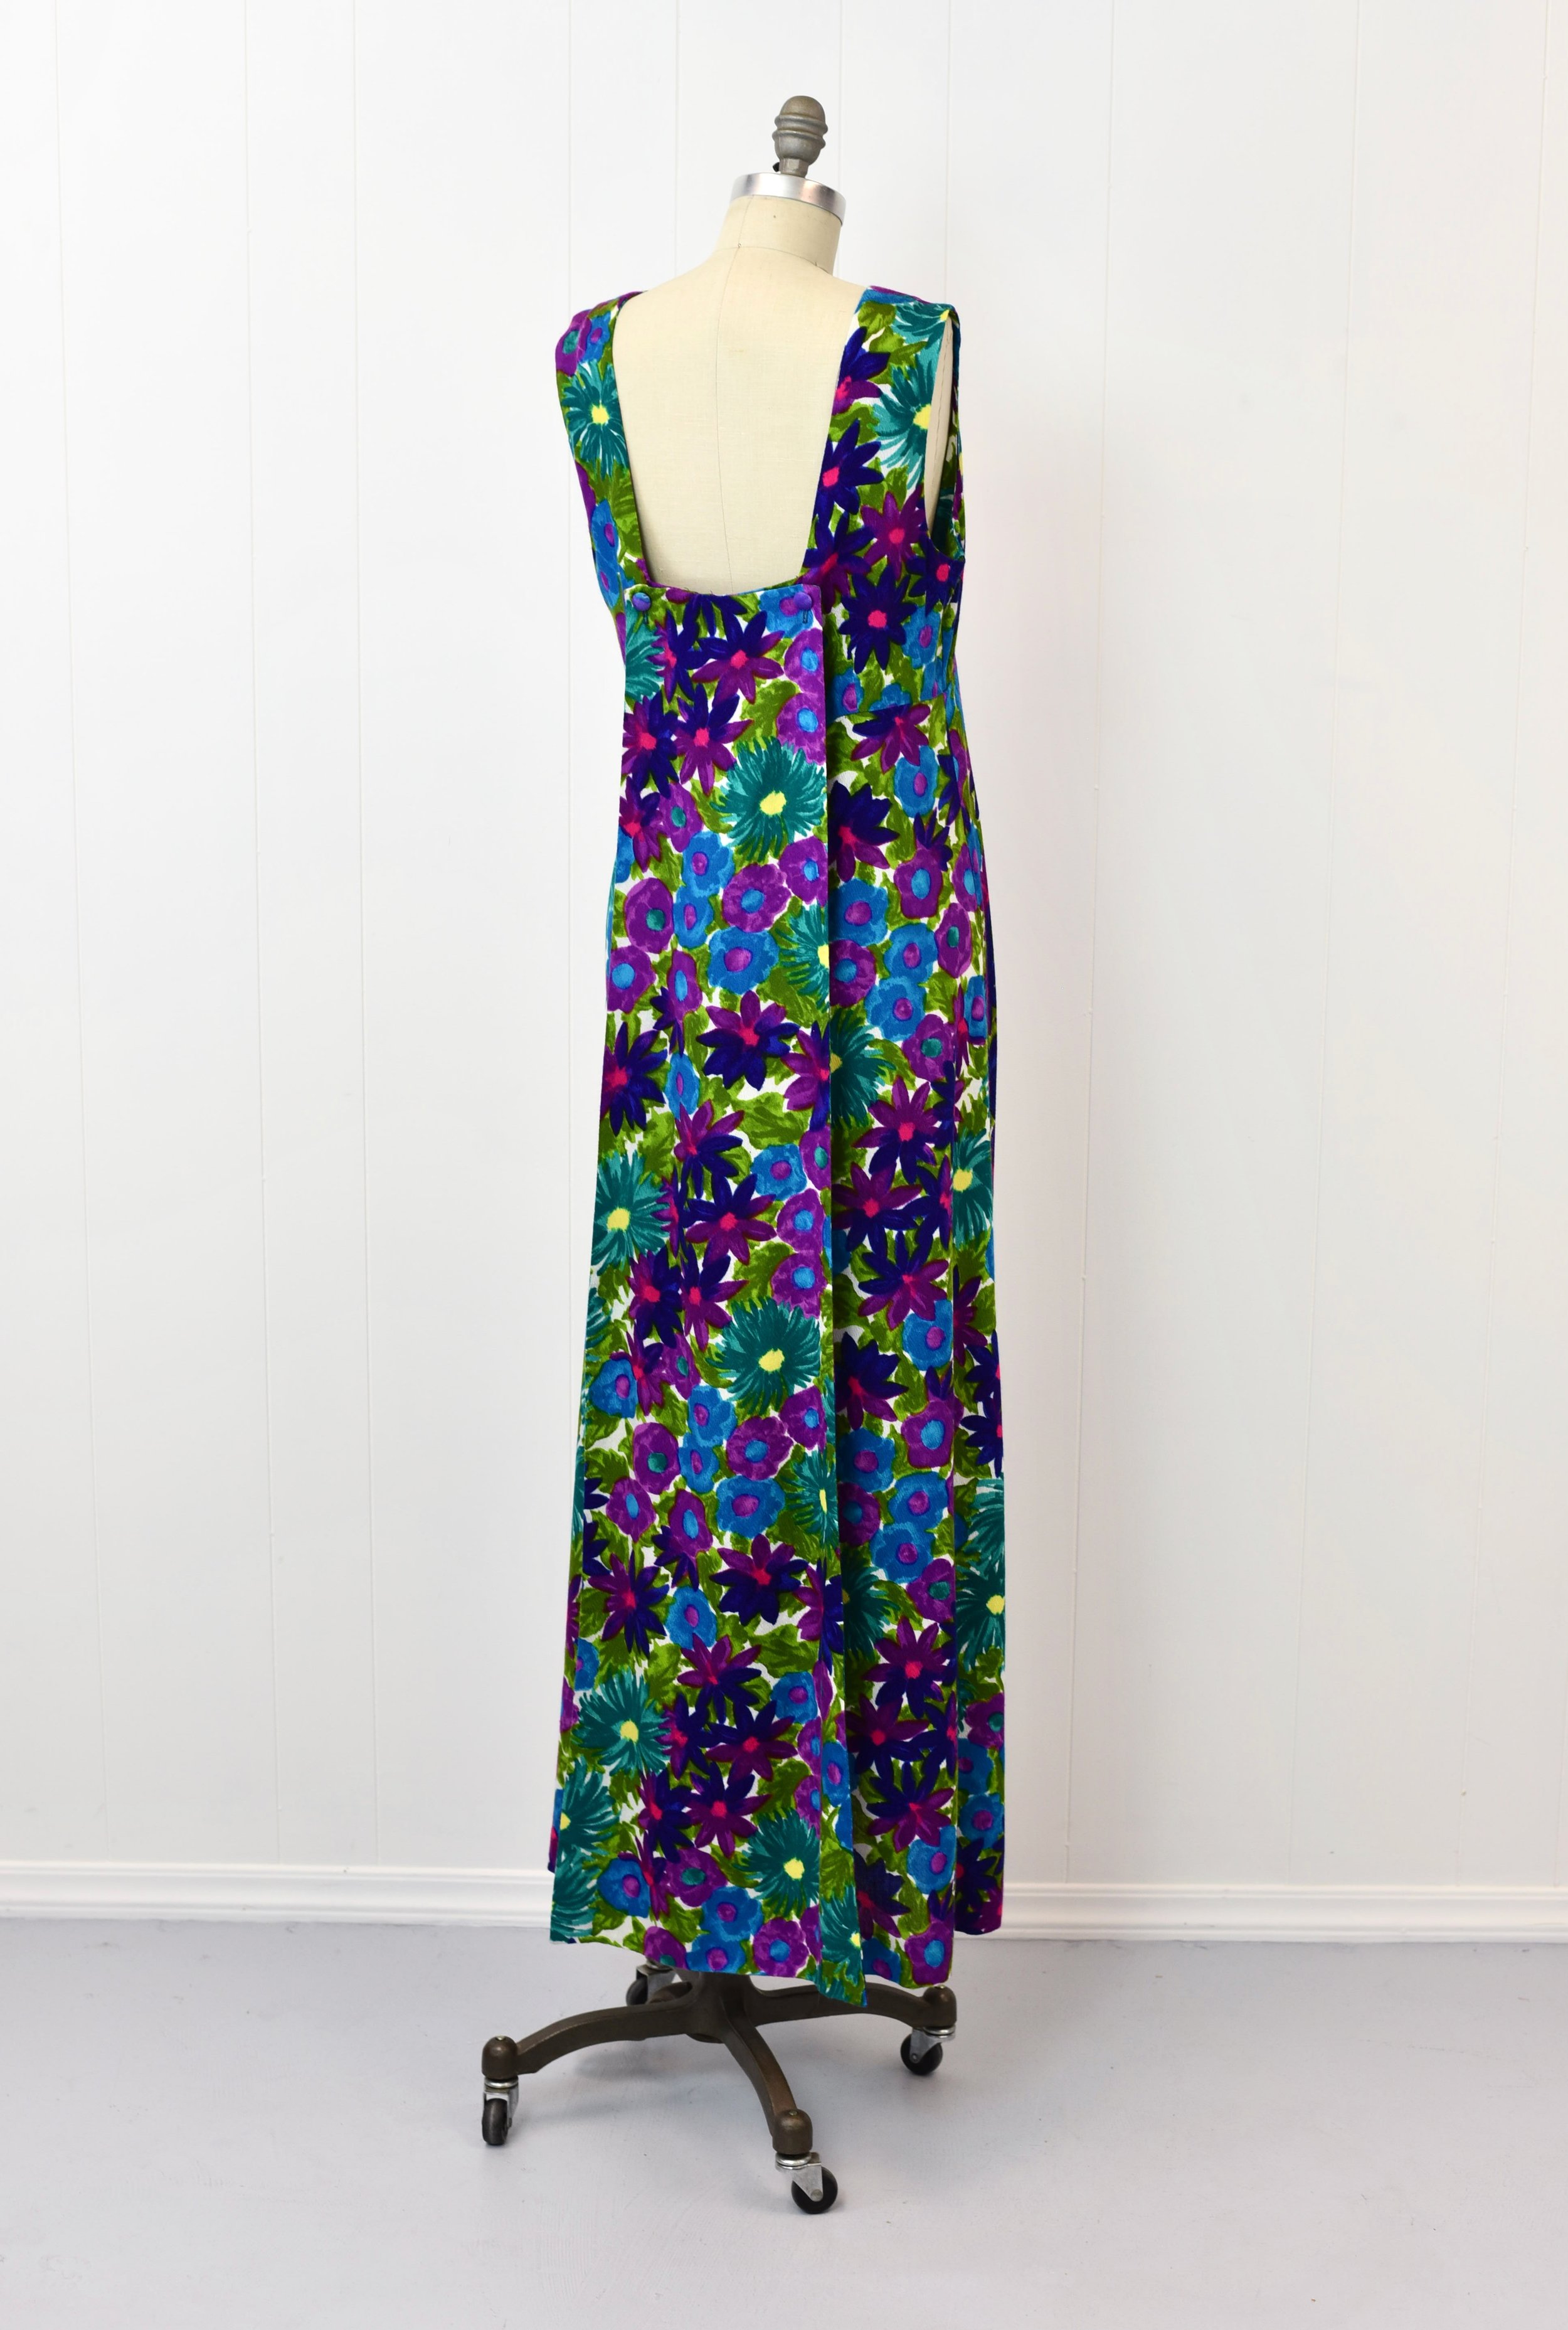 1960s Floral Purple Blue Dael's Casual Hawaiian Tiki Maxi Dress Gown —  Canned Ham Vintage